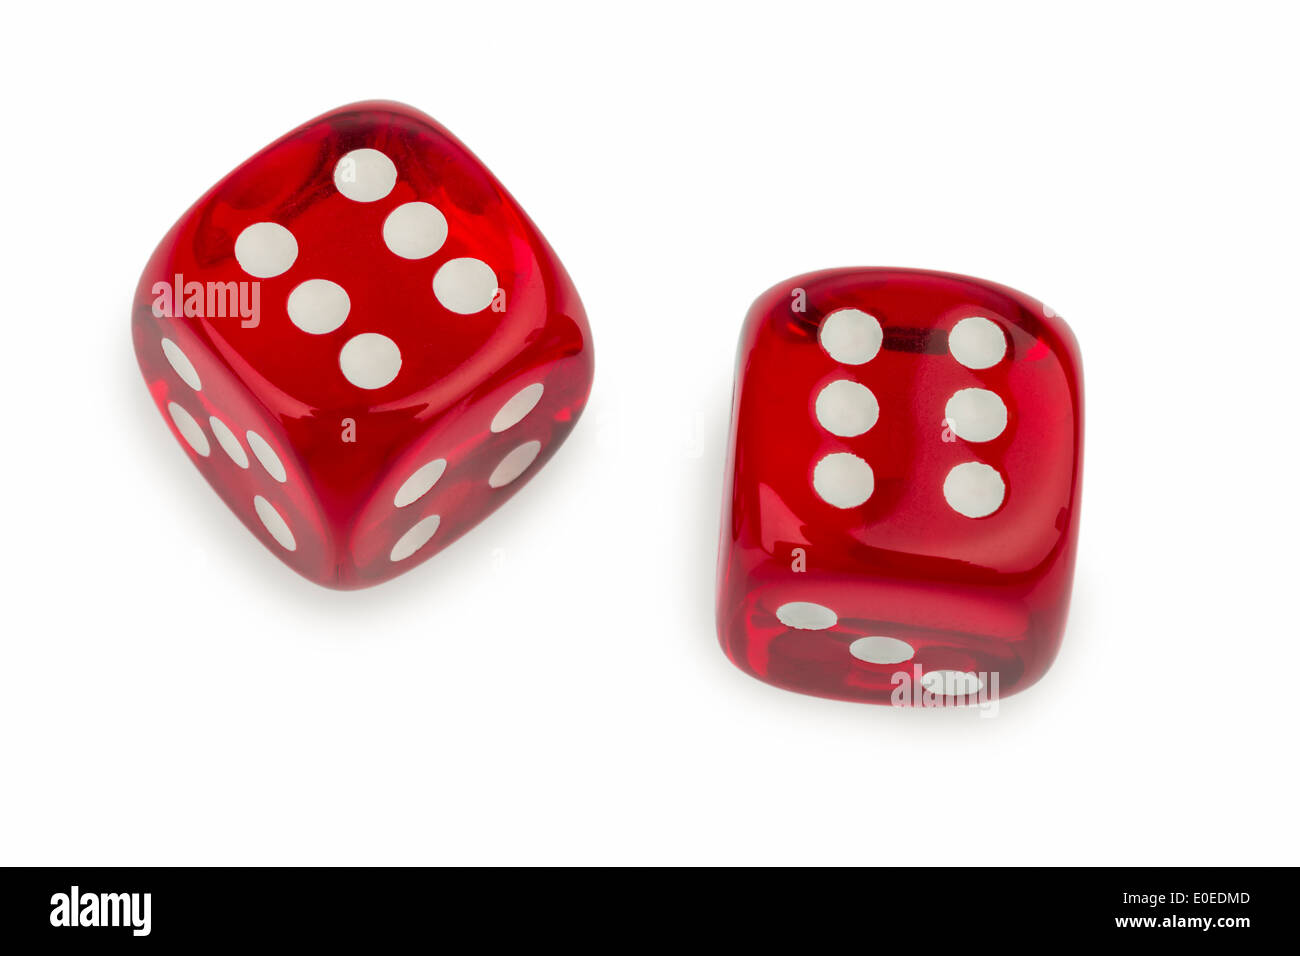 ed cube, symbolic photo for game of chance, risk and play addiction, Roter Wuerfel, Symbolfoto fuer Gluecksspiel, Risiko und Spi Stock Photo